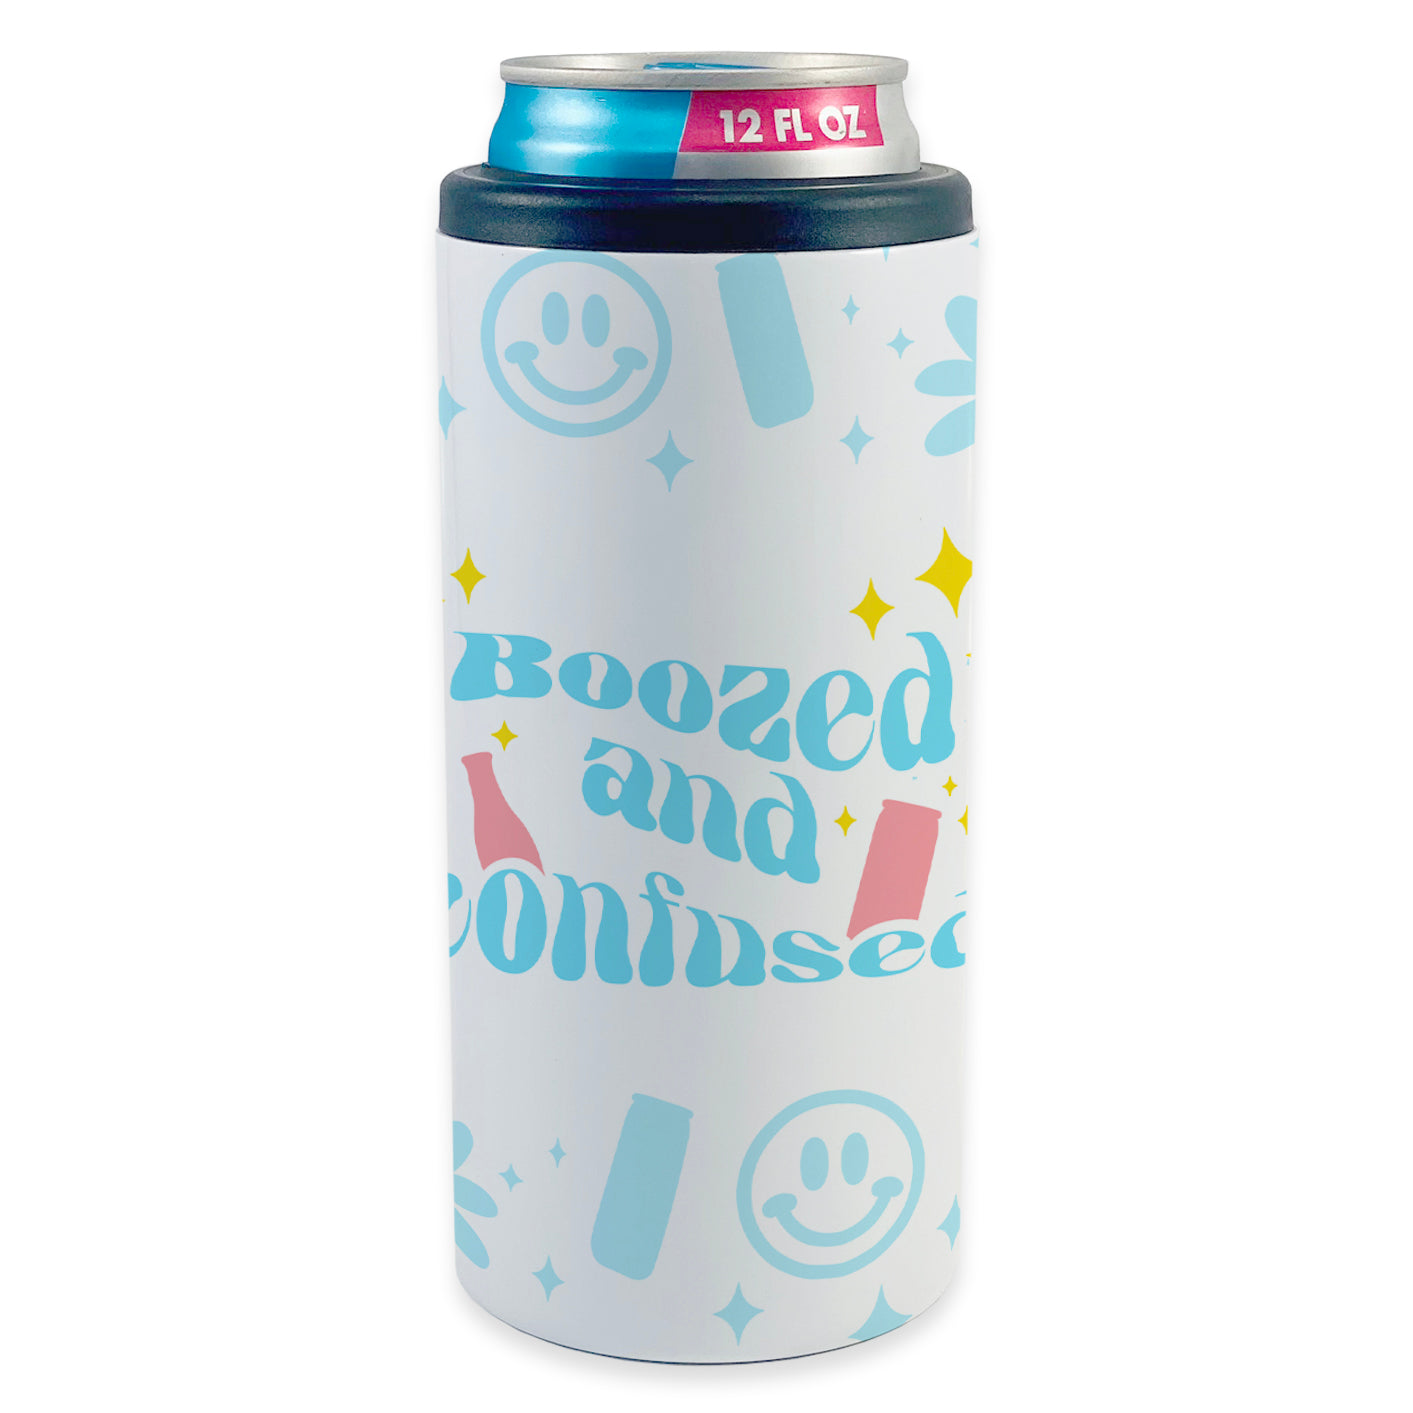 Bridal Party Collection (Boozed and Confused) 12 oz Stainless Steel Slim Can Cooler SSKOOW0009